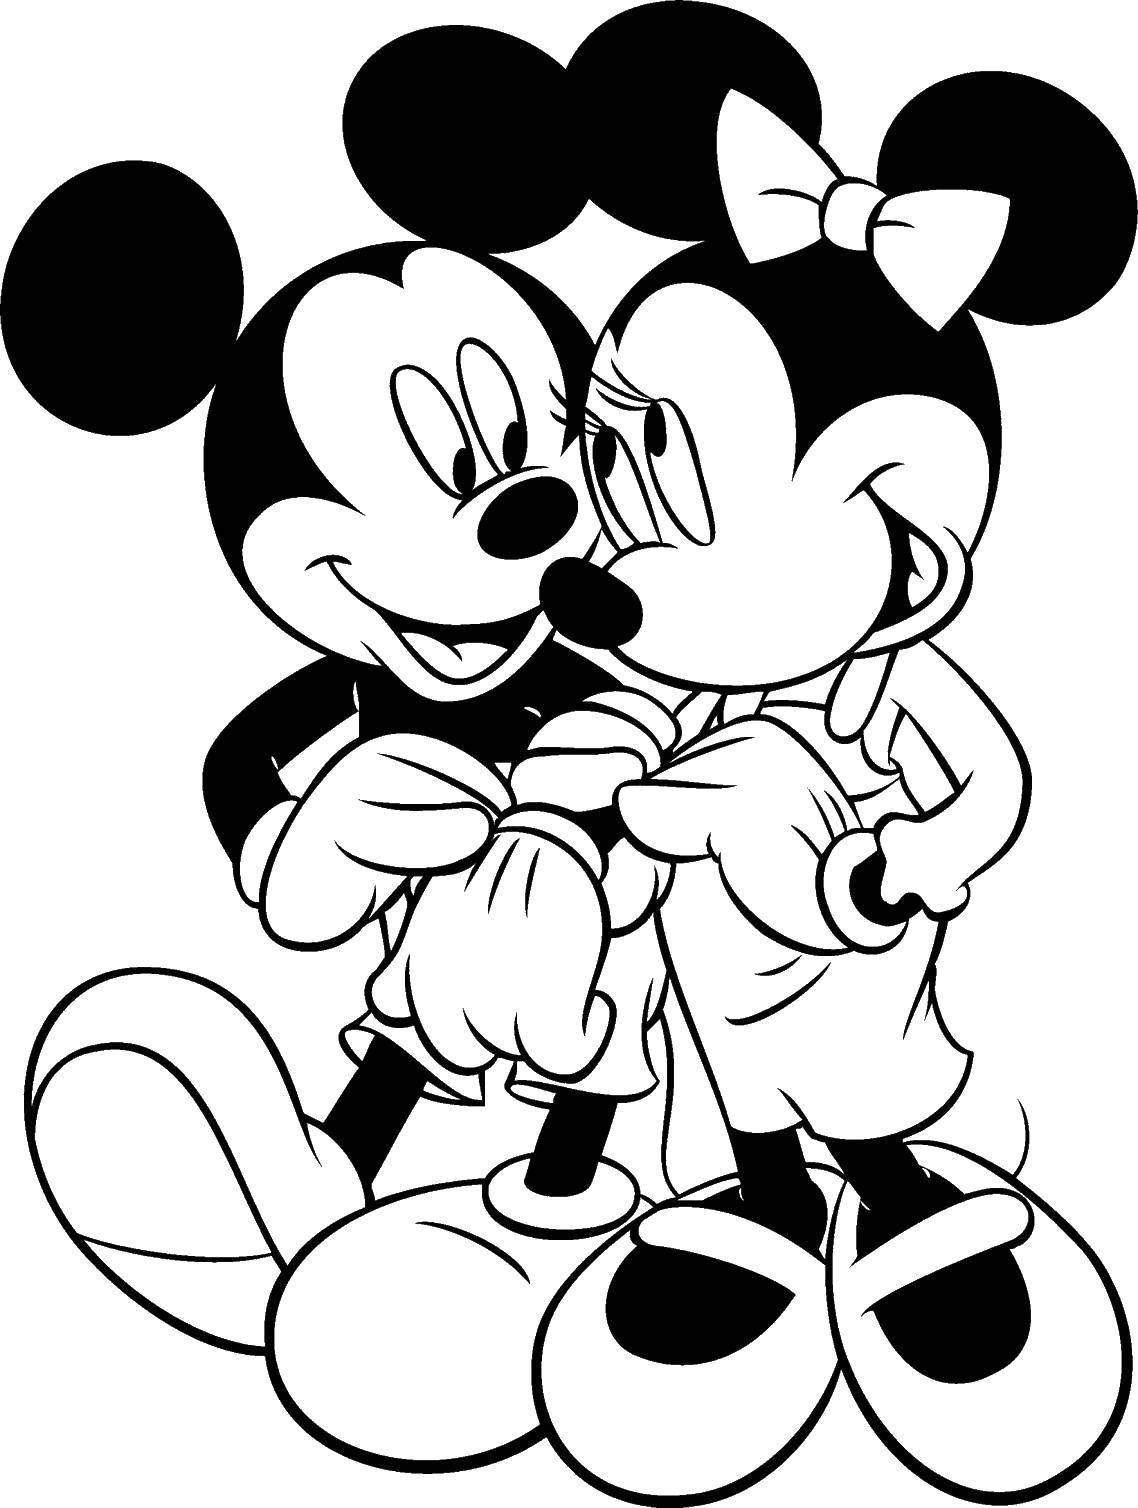 Coloring Mickey and mini mouse. Category Mickey mouse. Tags:  Mickey mouse, Minnesota North mouse, love.